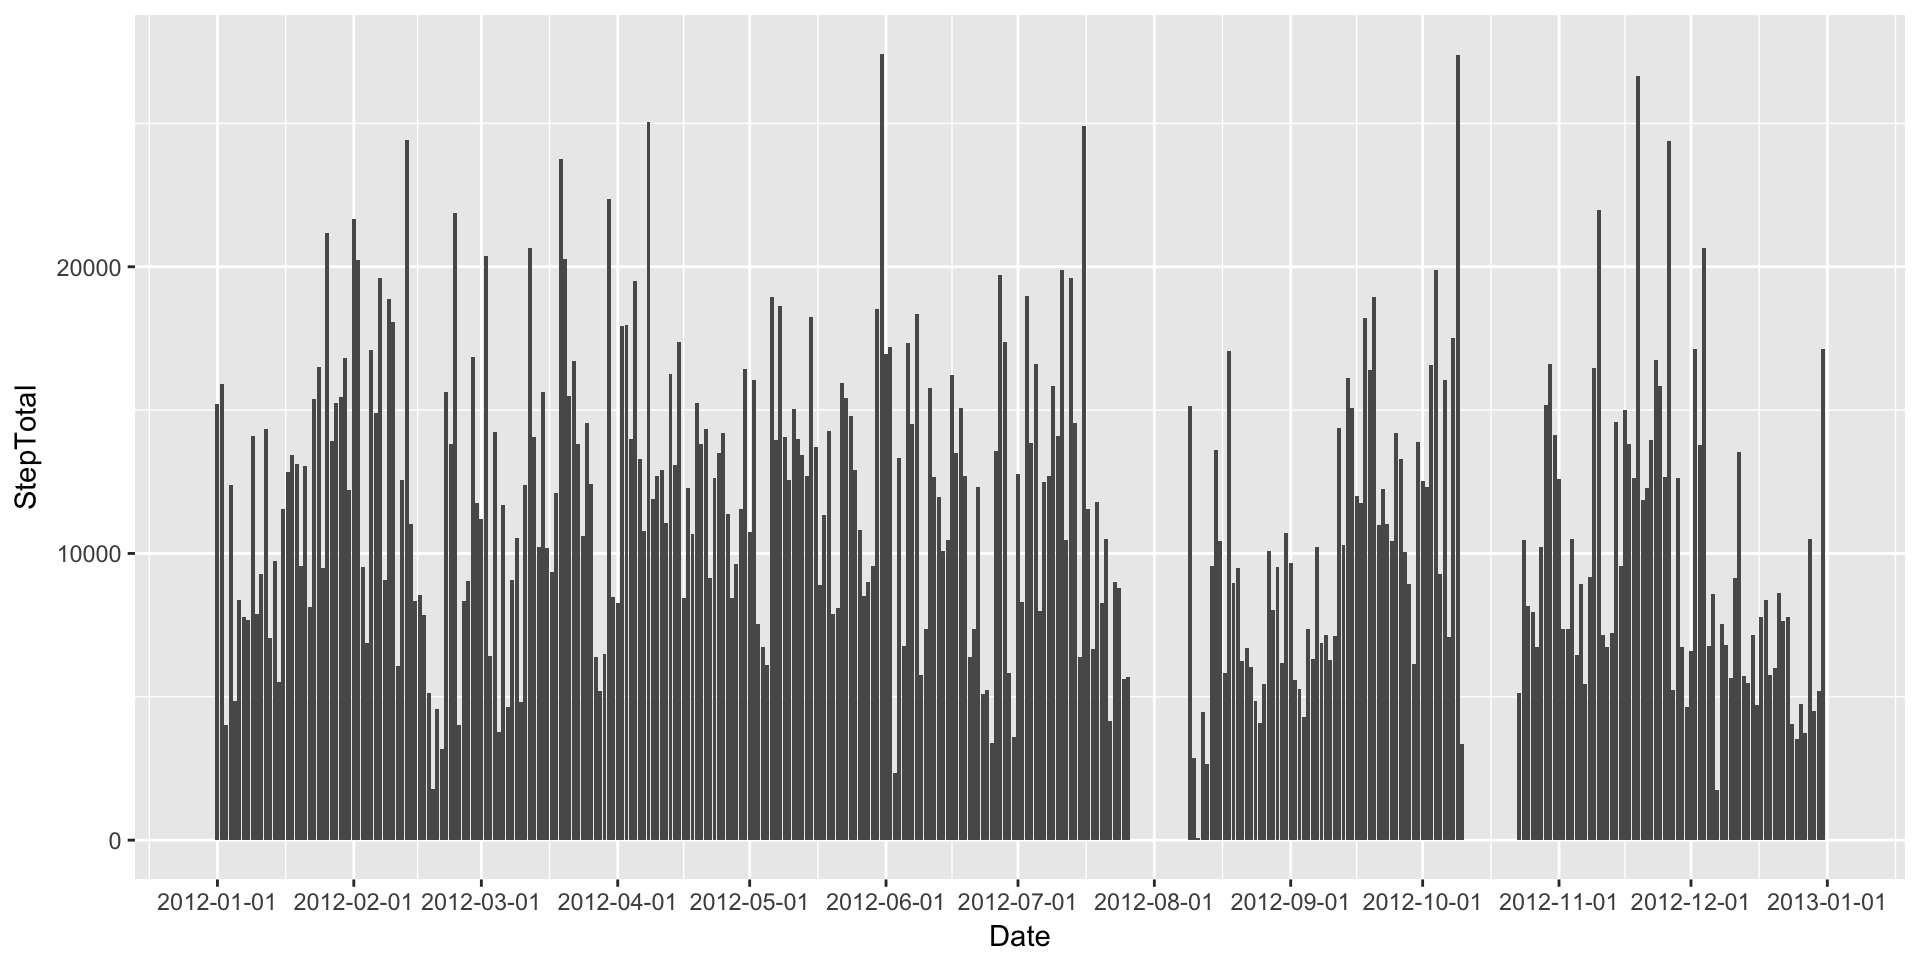 Plot of the HHGG time series (dotted line)